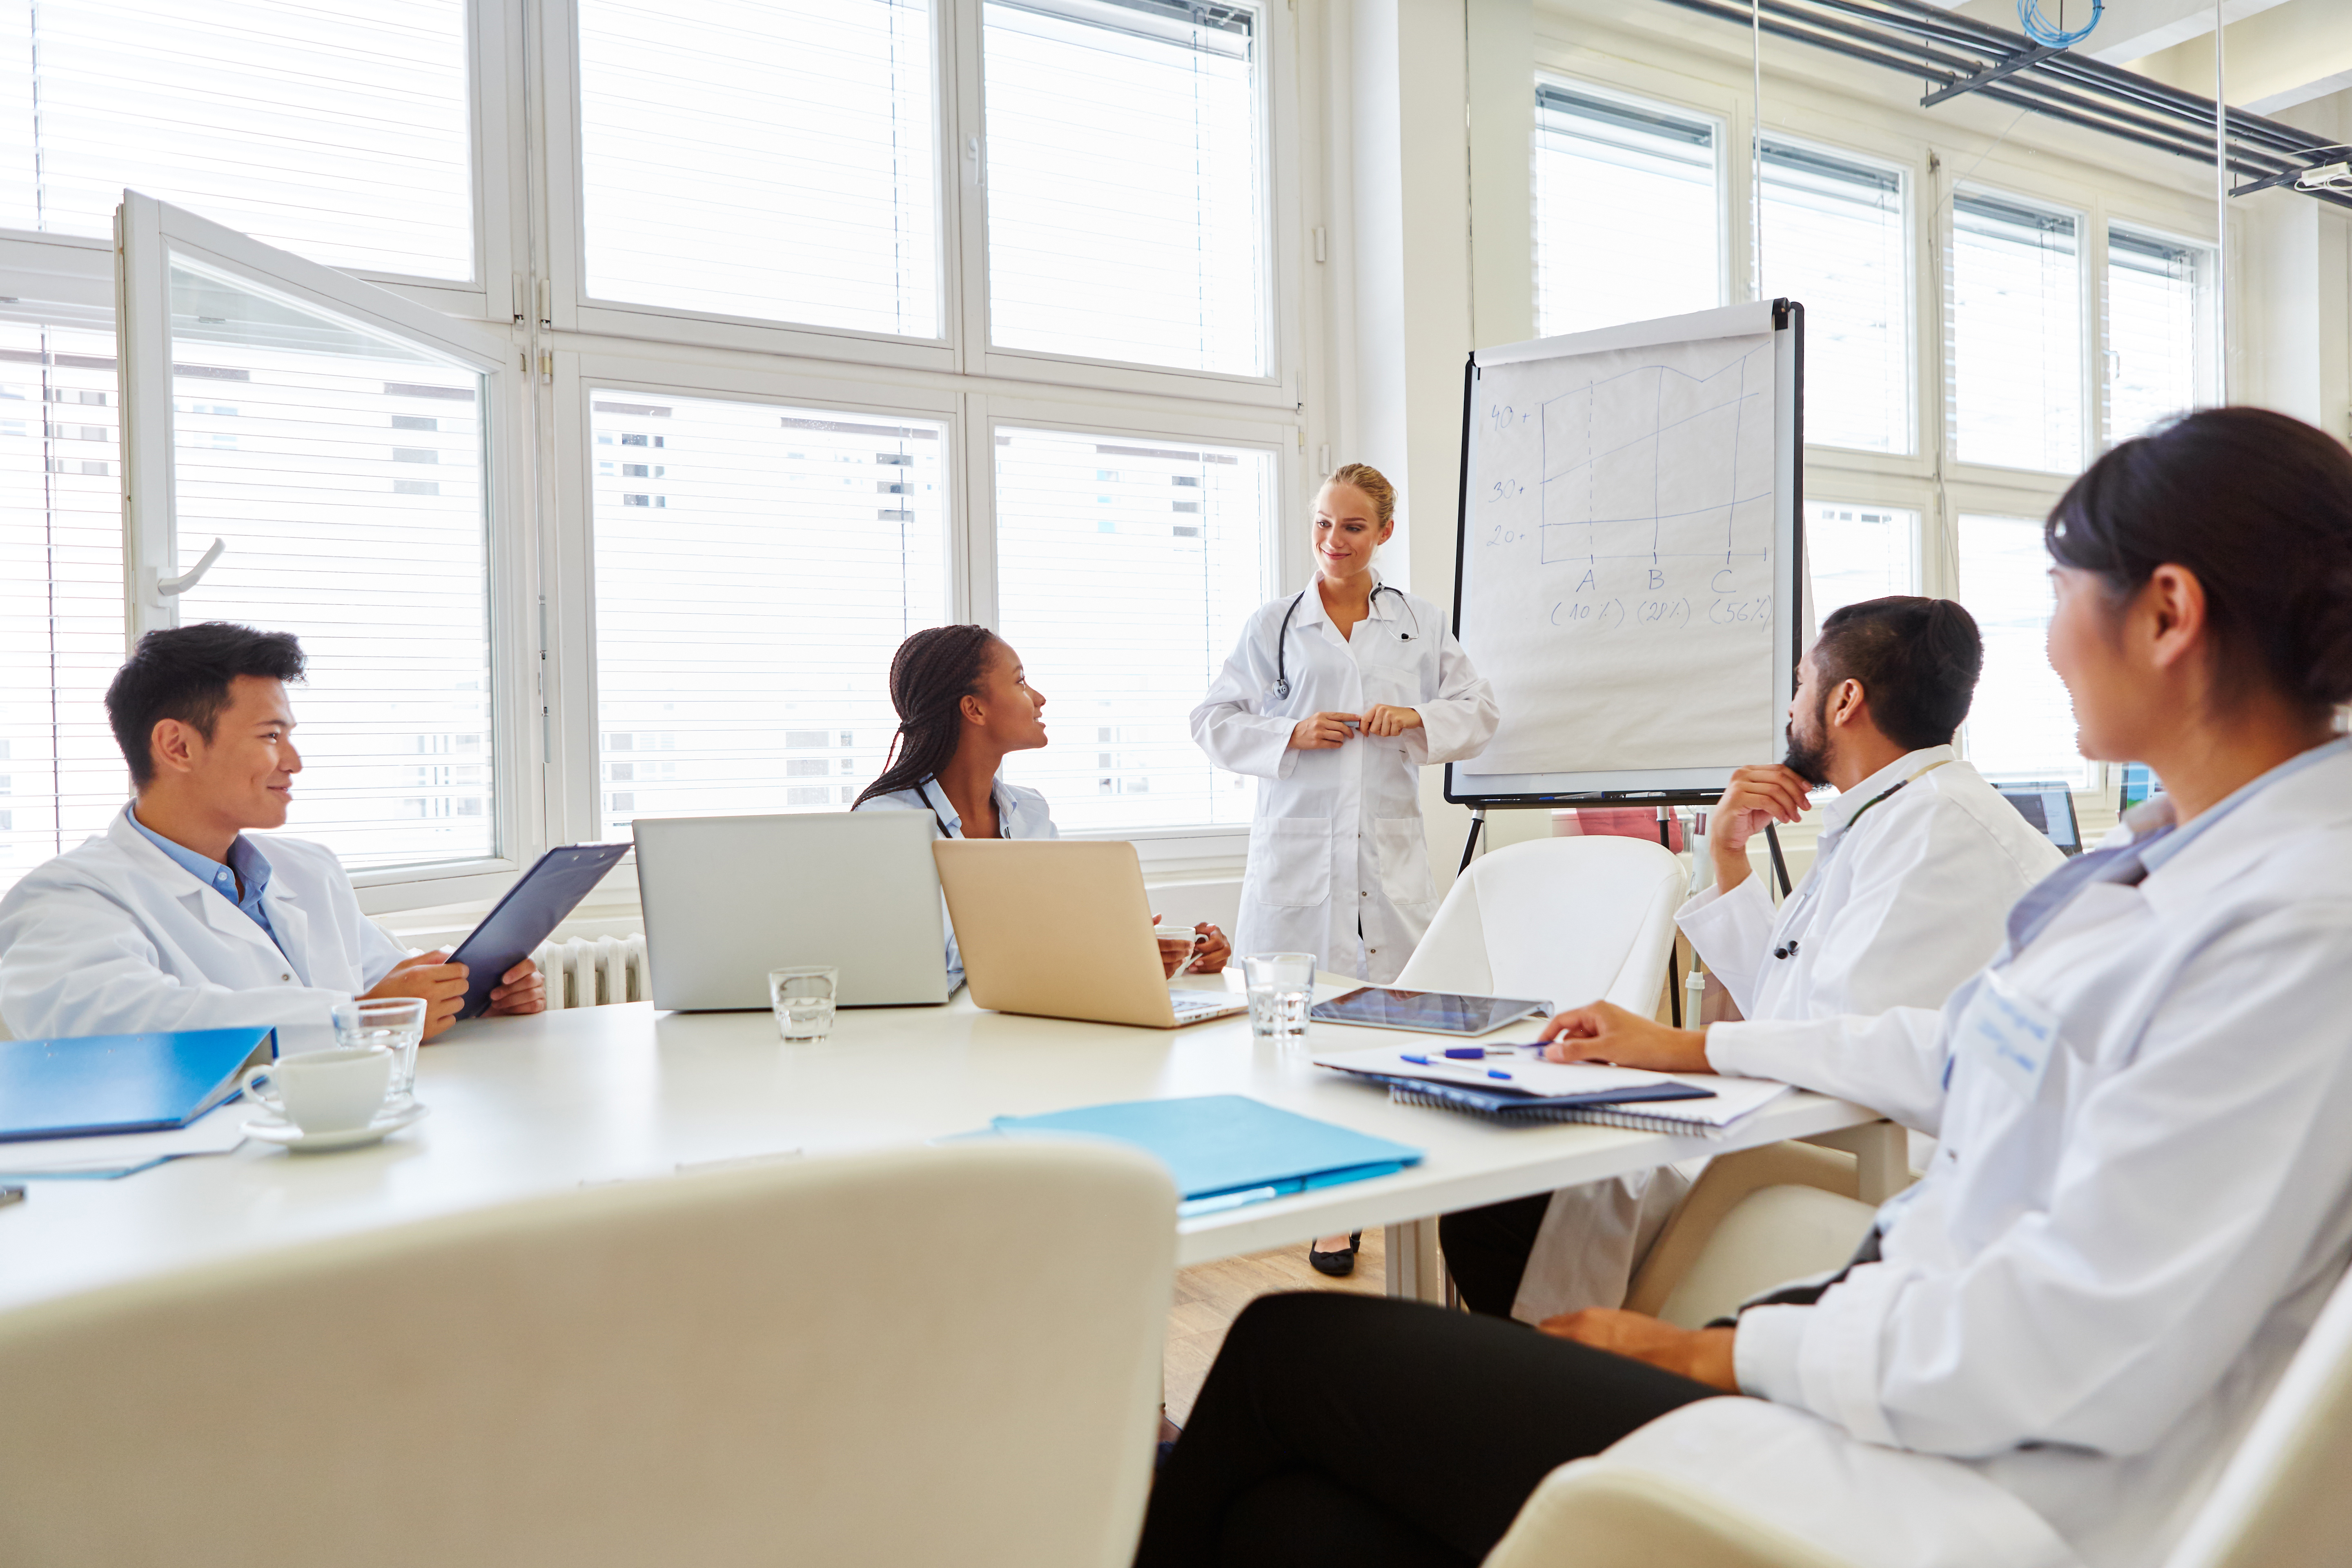 Group of health care providers sitting around a table looking at another health care provider standing in front of a white board.